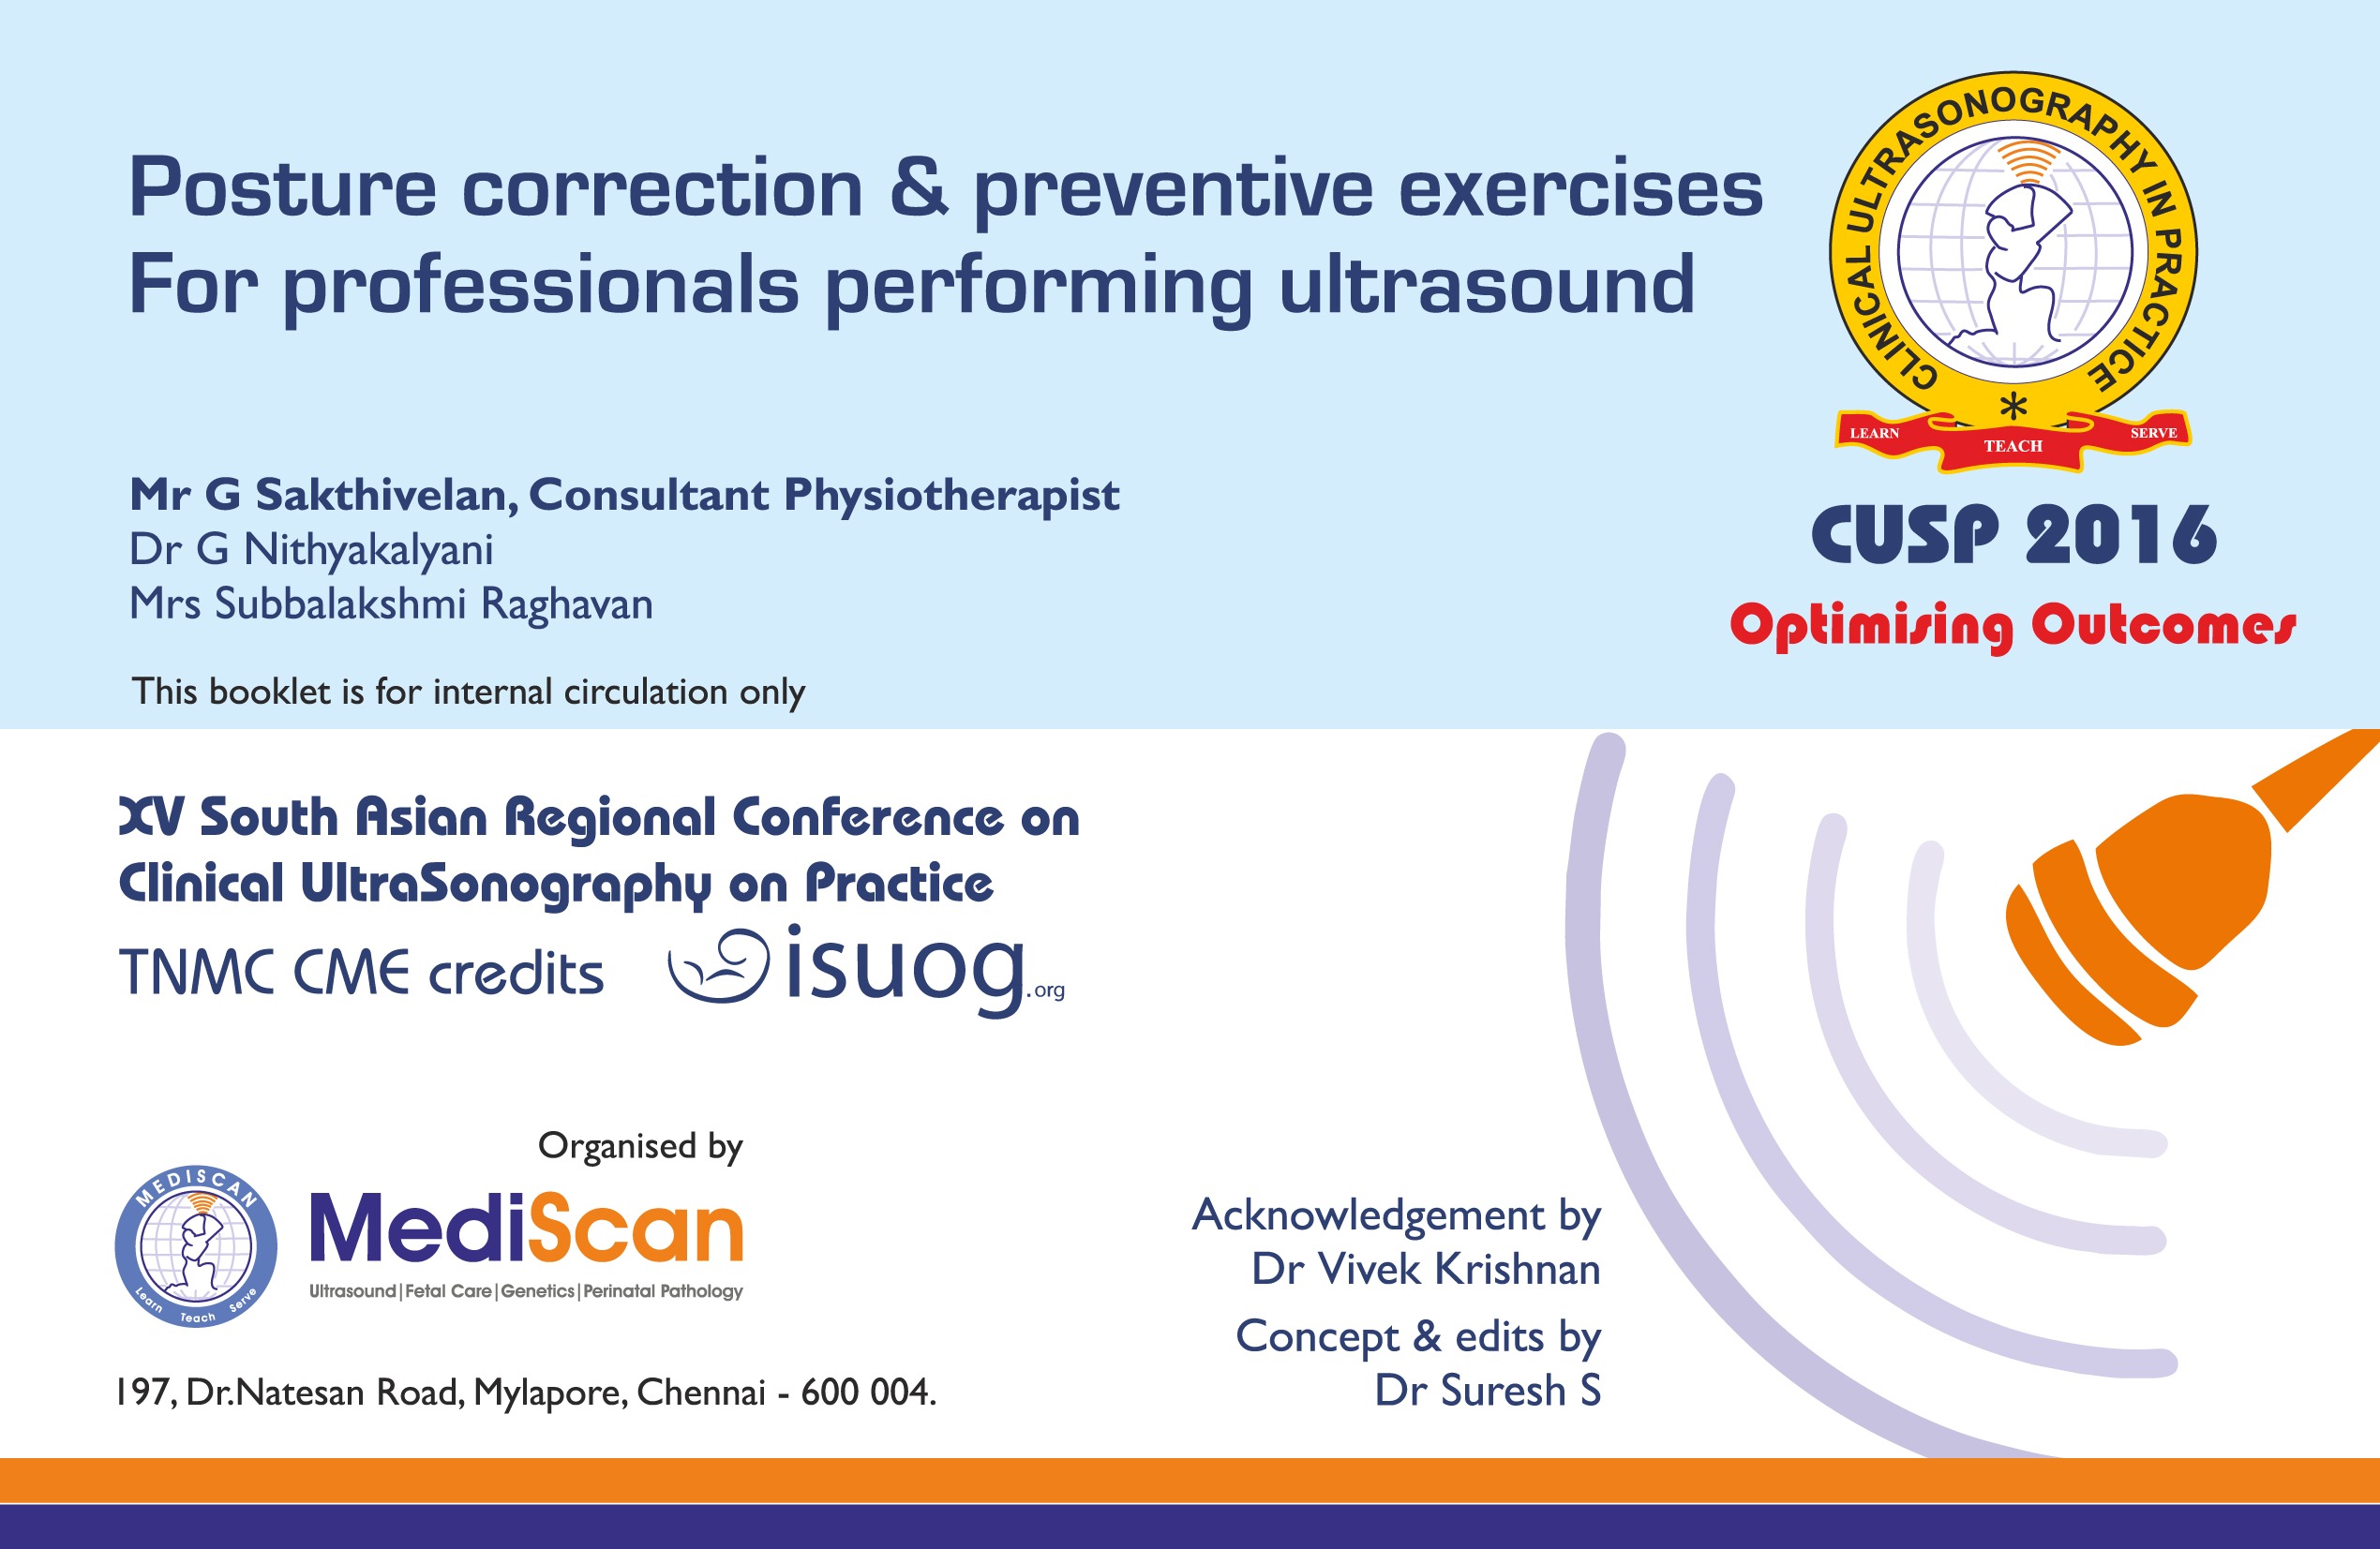 Posture-correction-&-preventive-exercises-For-Professionals-performing-ultrasound-2016